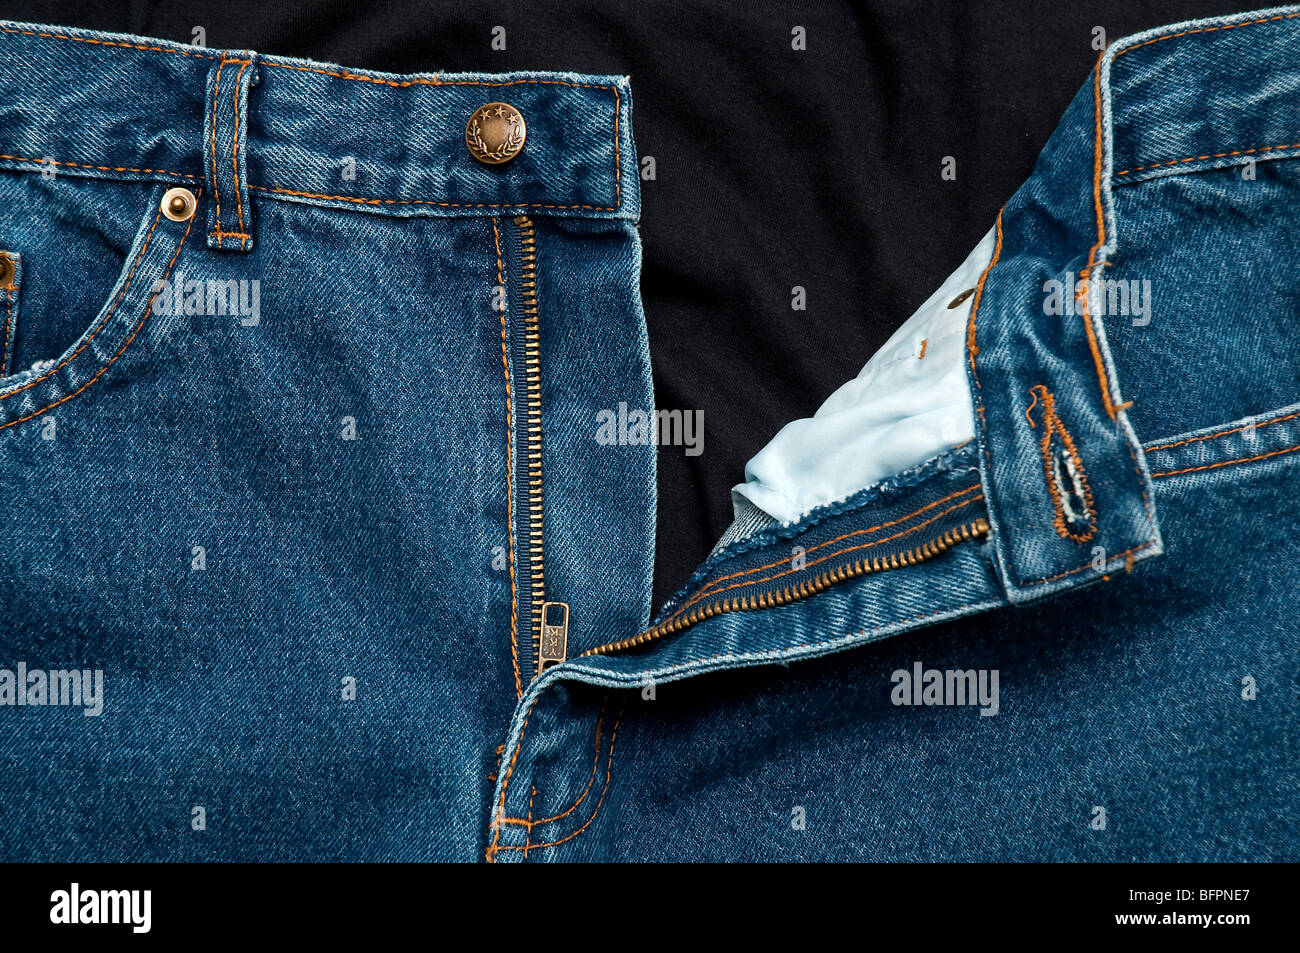 A pair of jeans pants Stock Photo